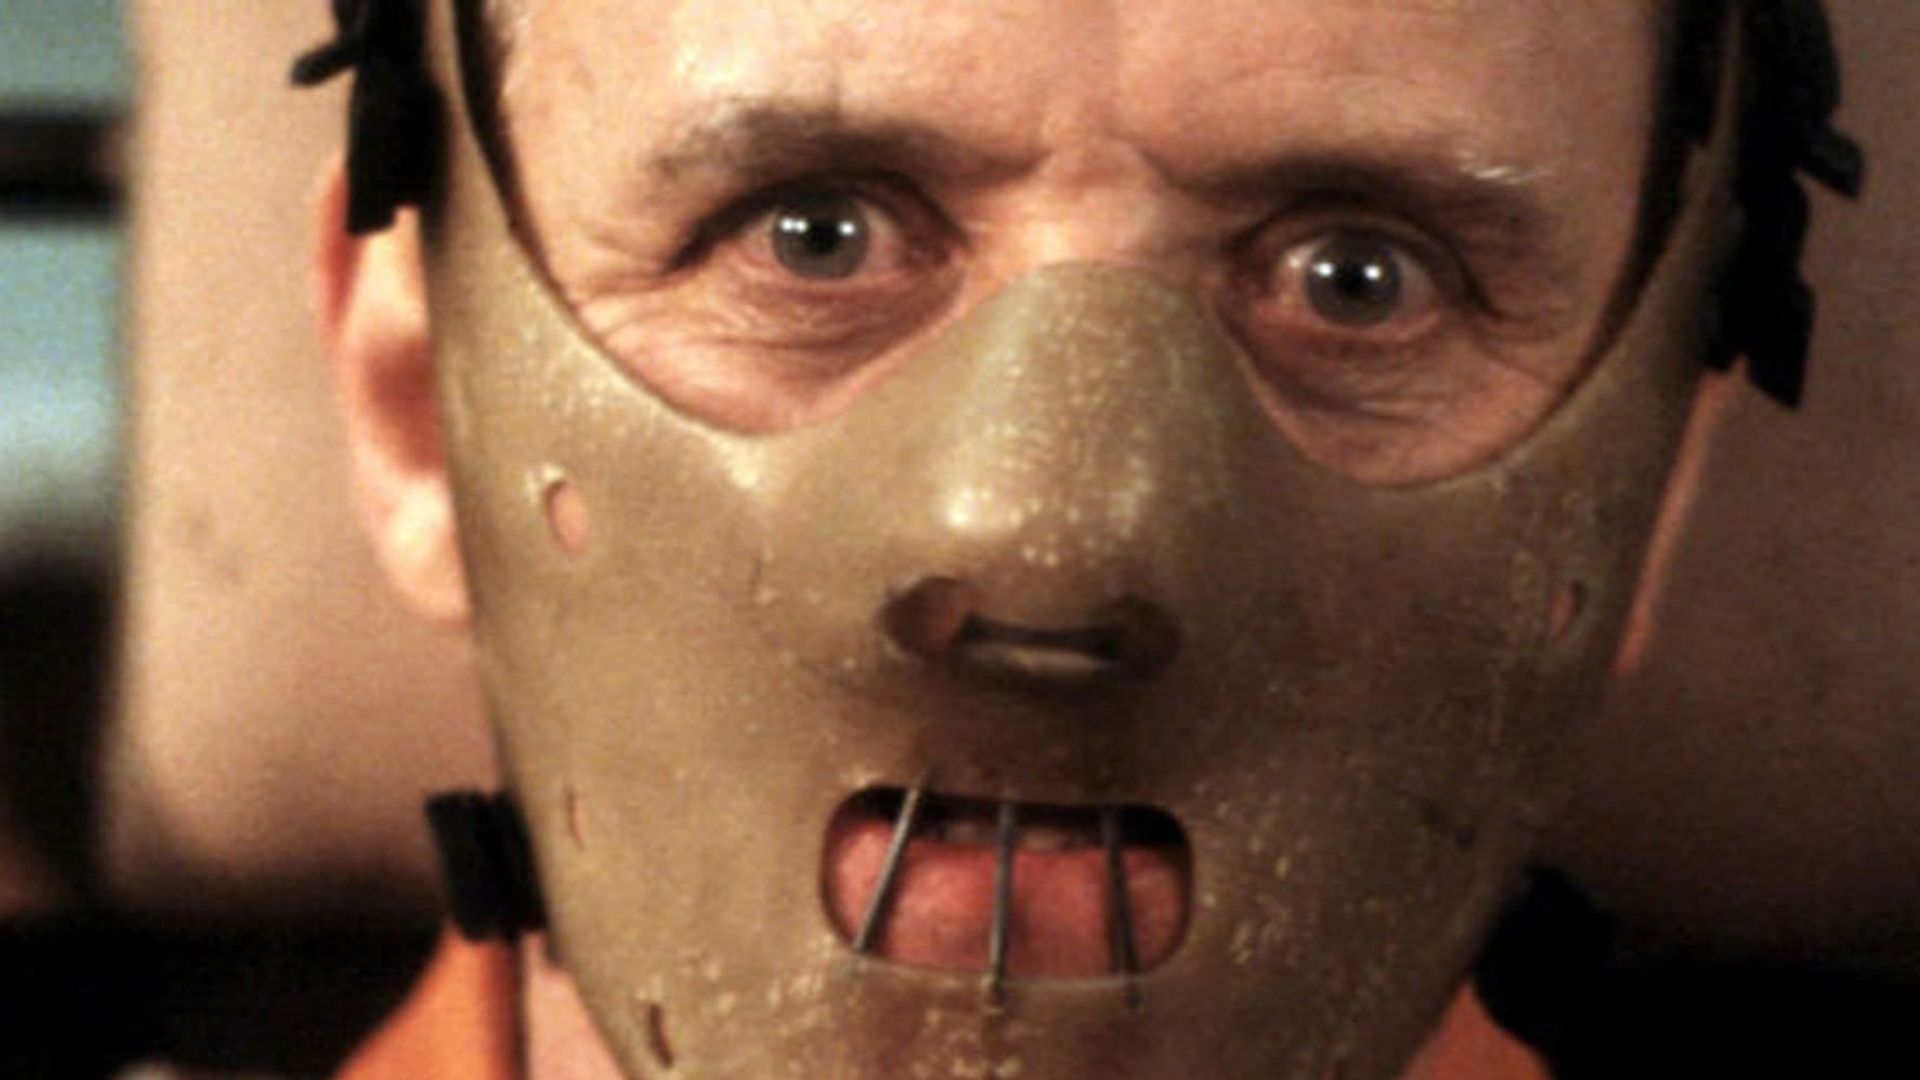 Inside the Labyrinth: The Making of 'The Silence of the Lambs' background